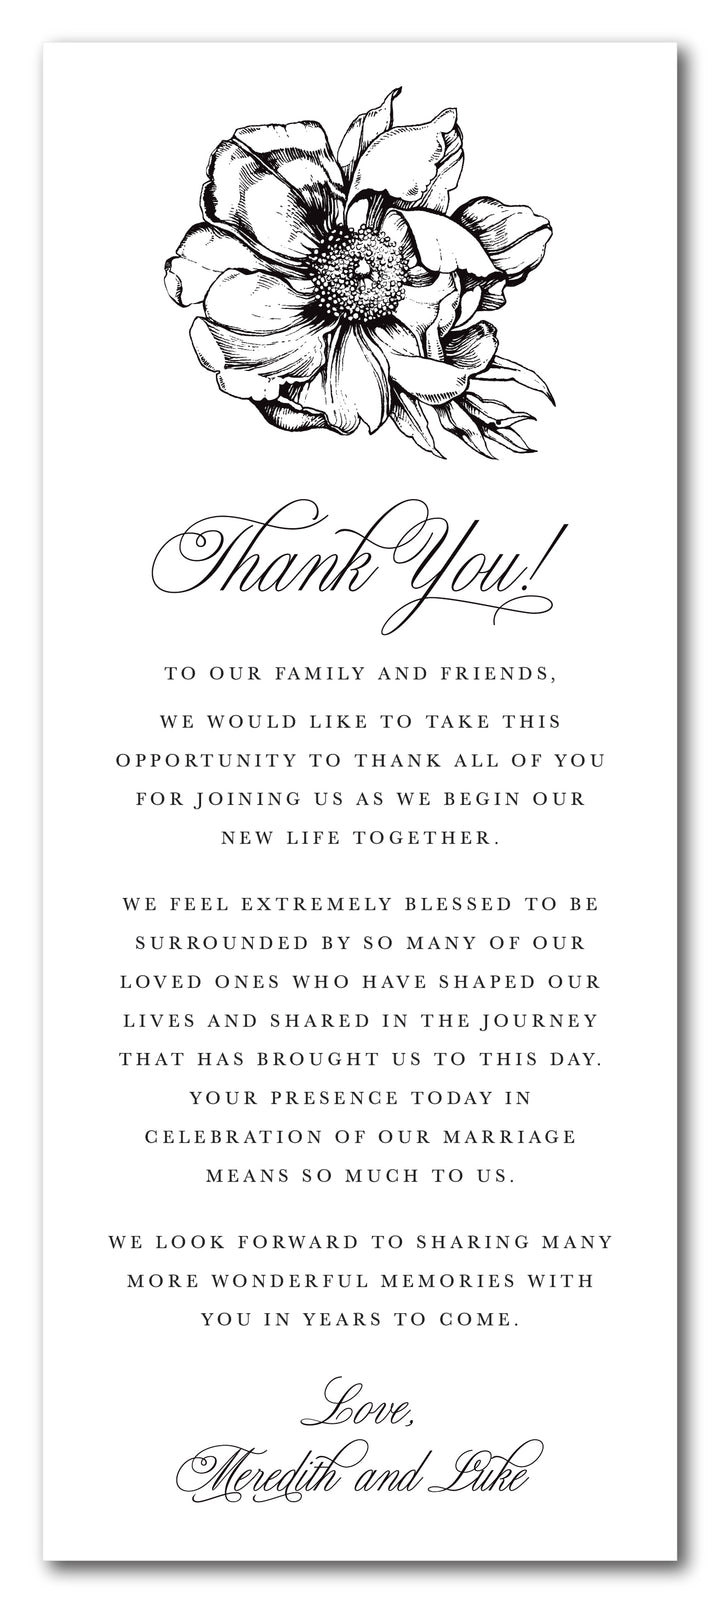 The Meredith Thank You Place Setting Card